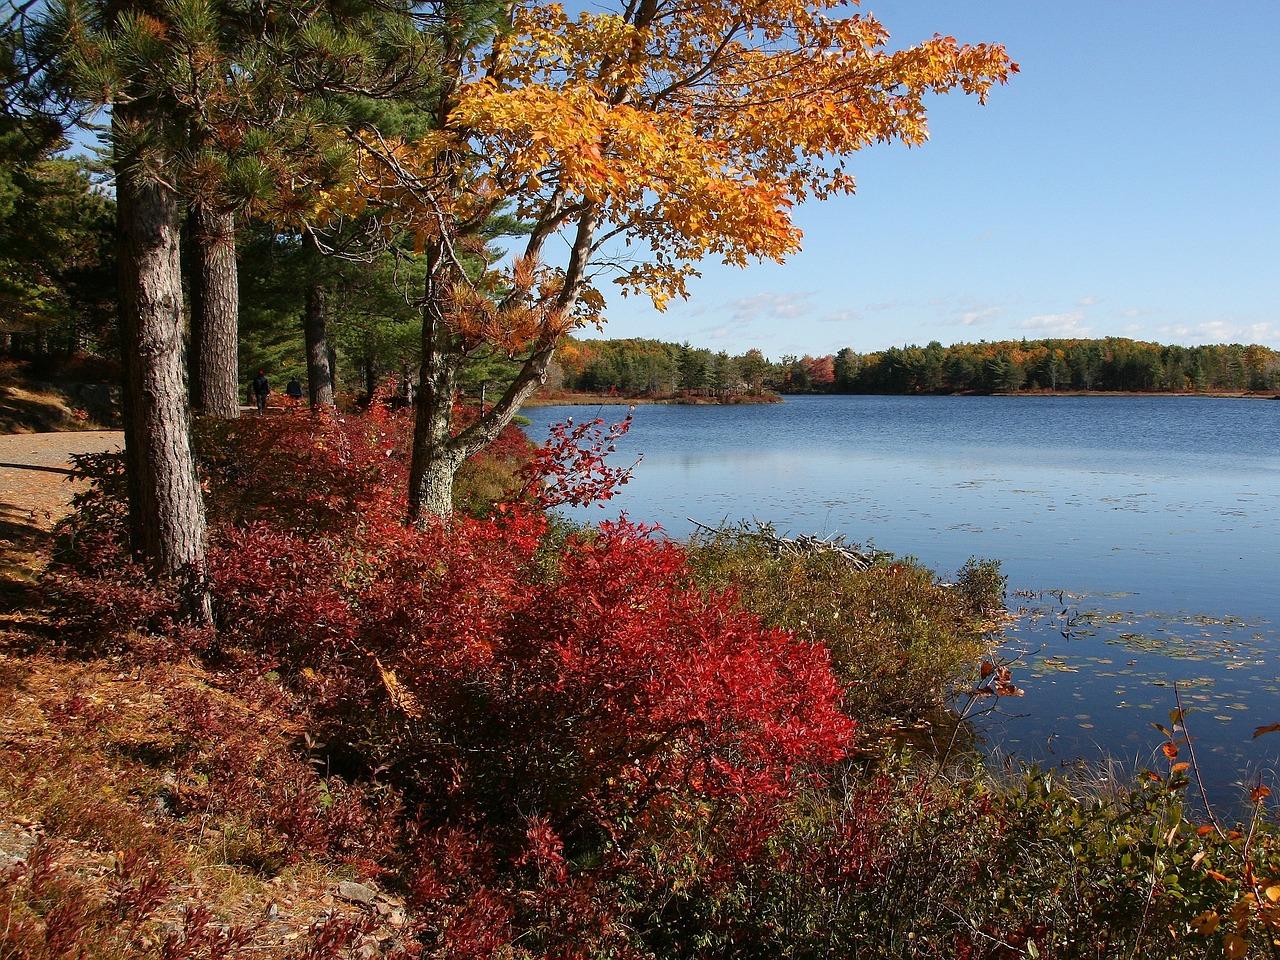 Fall foliage along a body of water in Acadia National Park. Image by user 12019 from Pixabay.